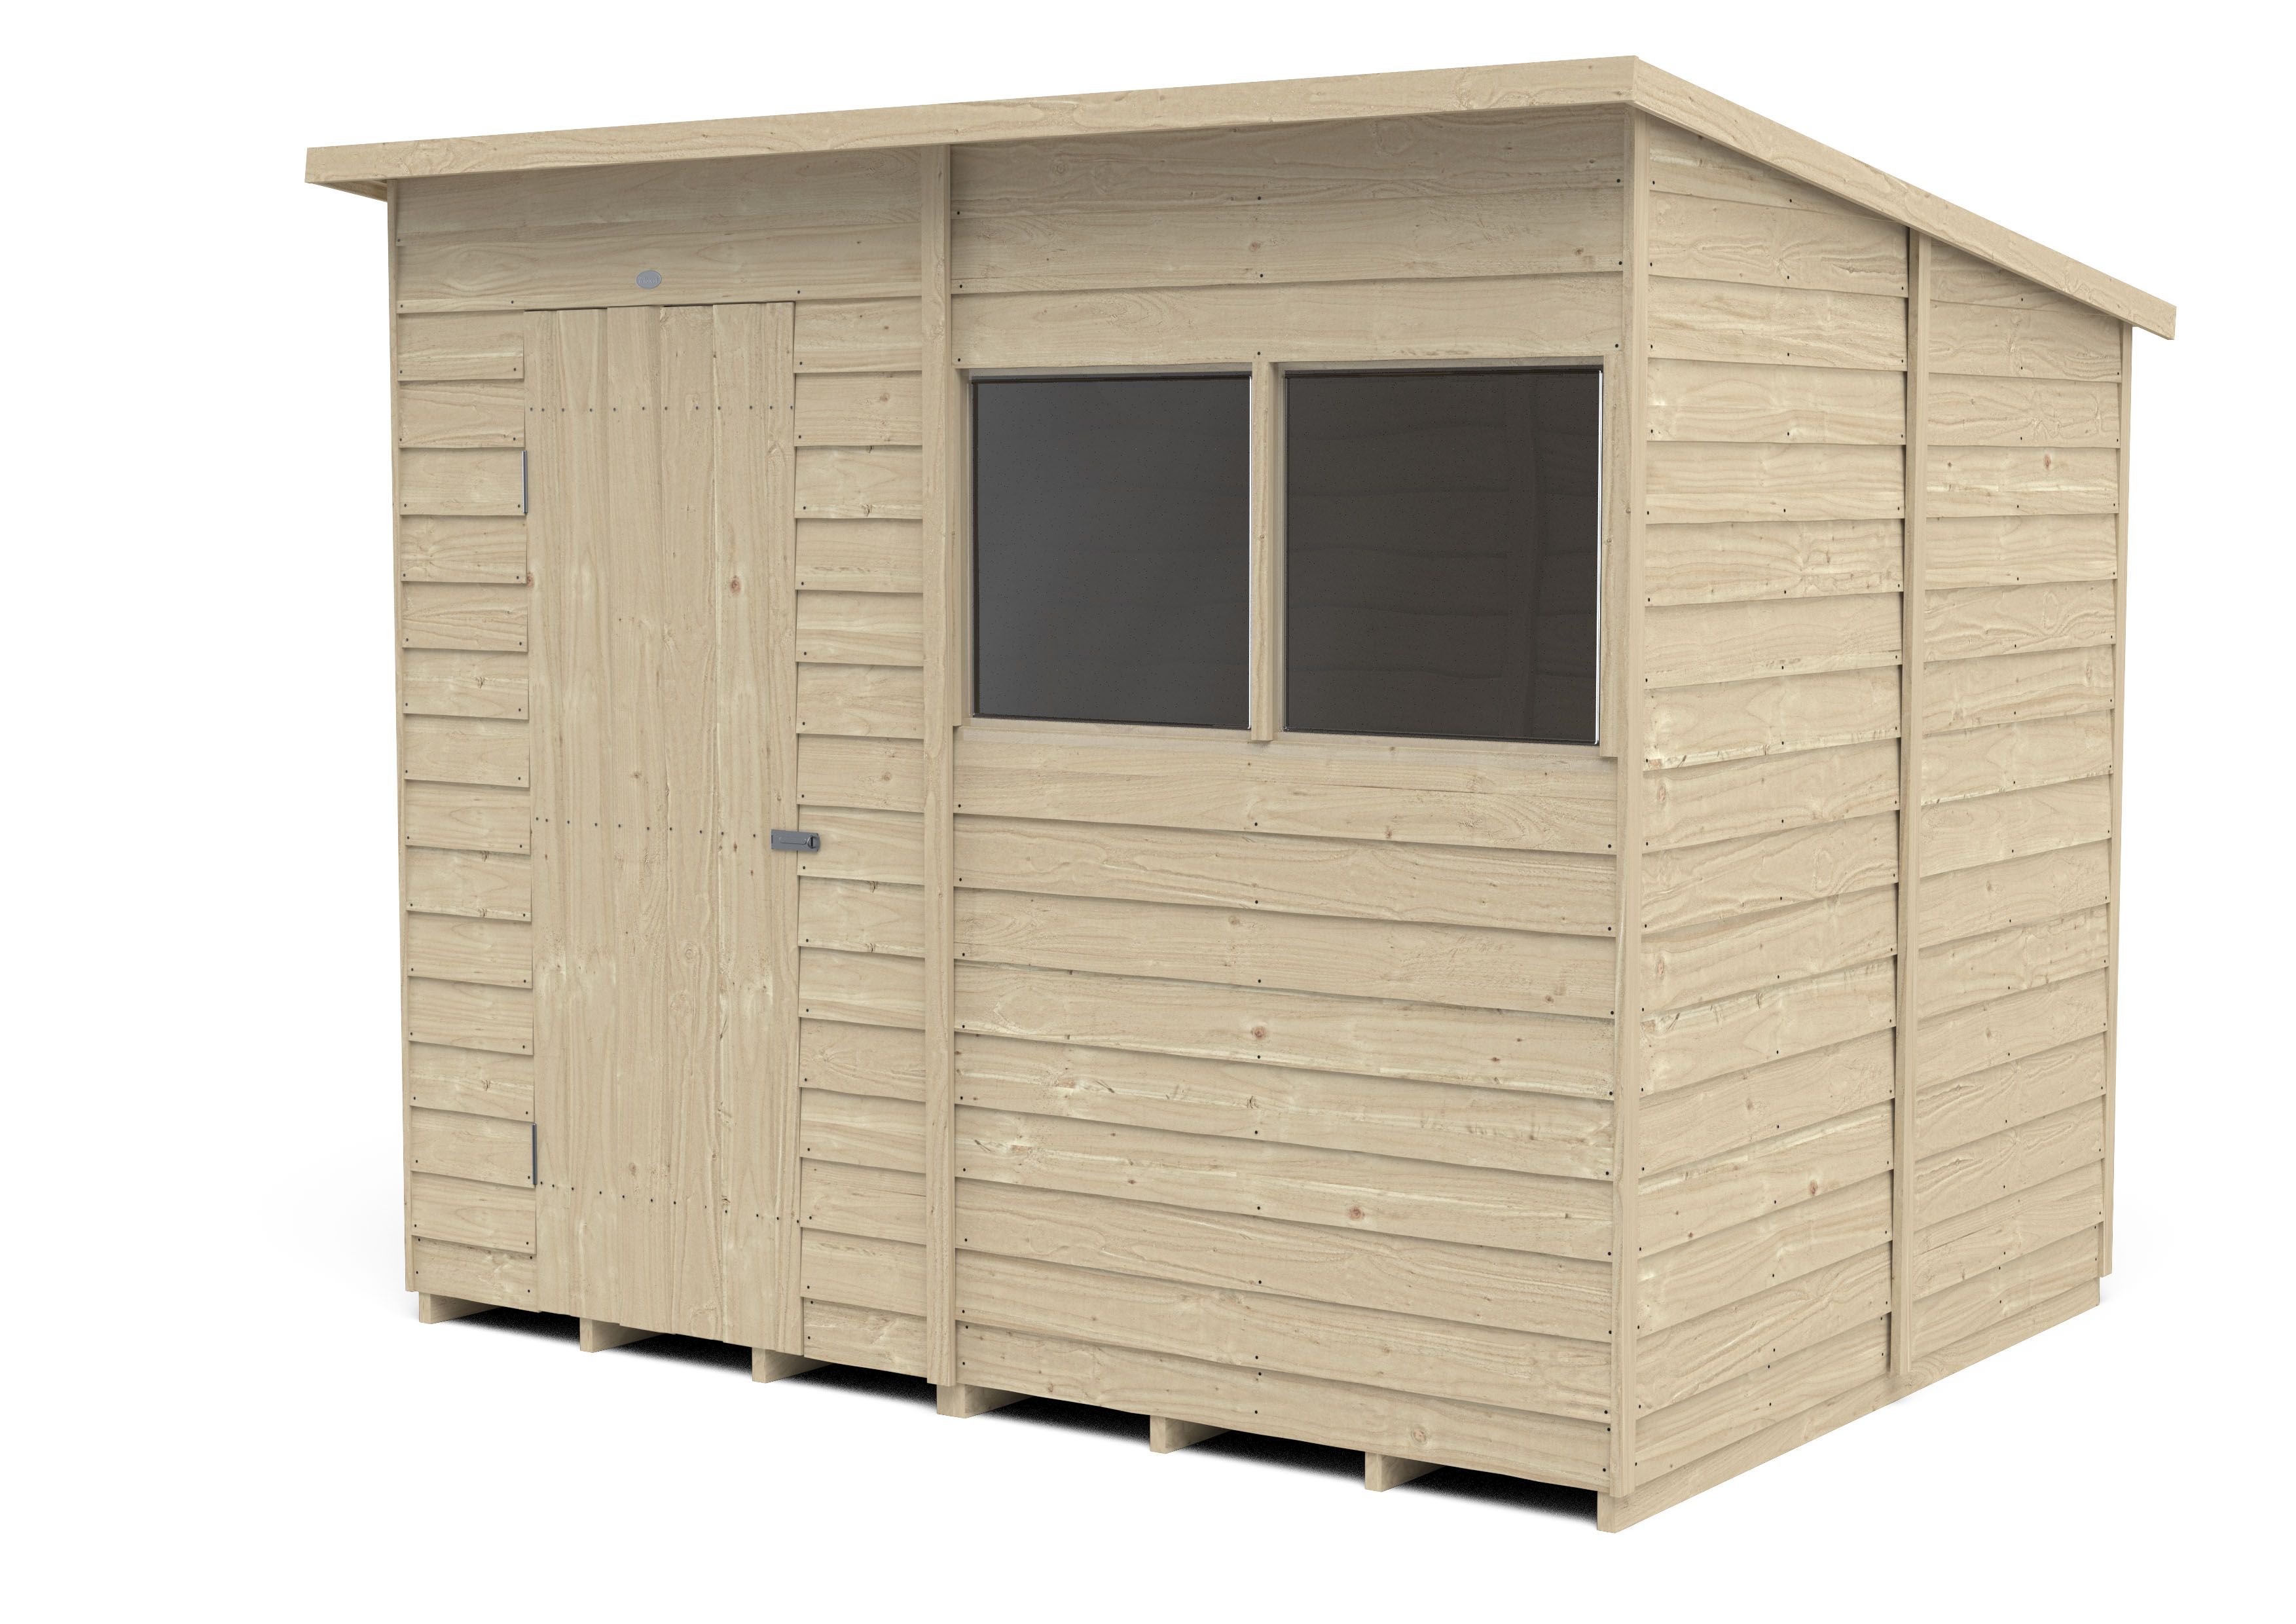 Forest Garden Overlap 8x6 ft Pent Wooden Pressure treated Shed with floor & 2 windows (Base included)